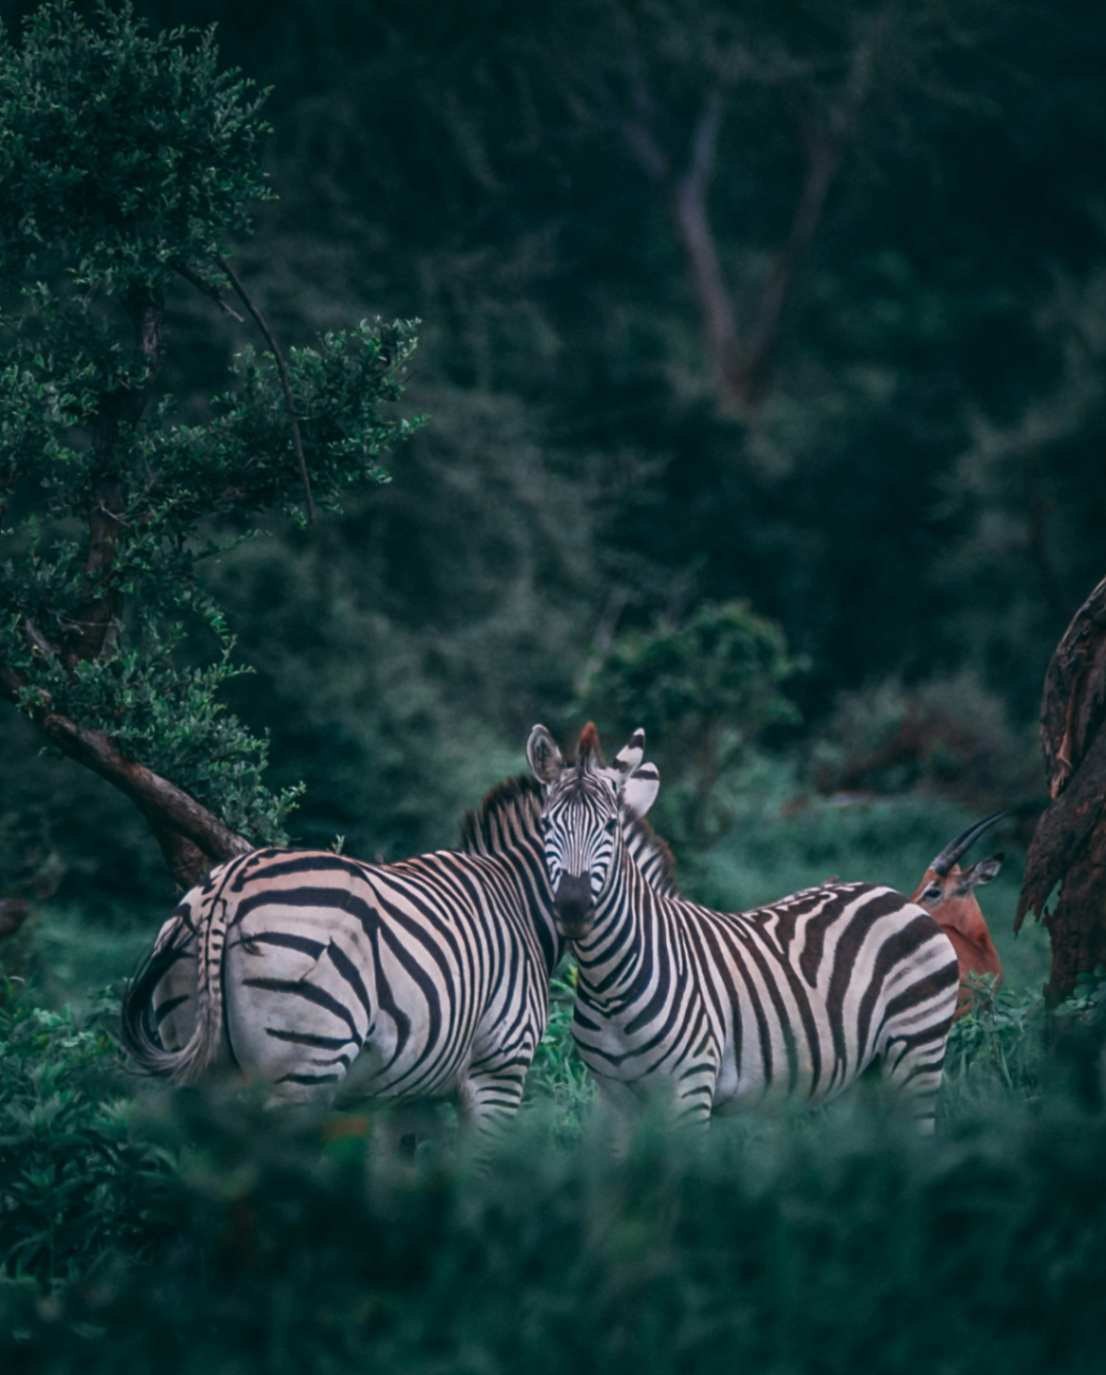 zebras is the black and white stripes that cover every part of their skin find them at chobe national park.